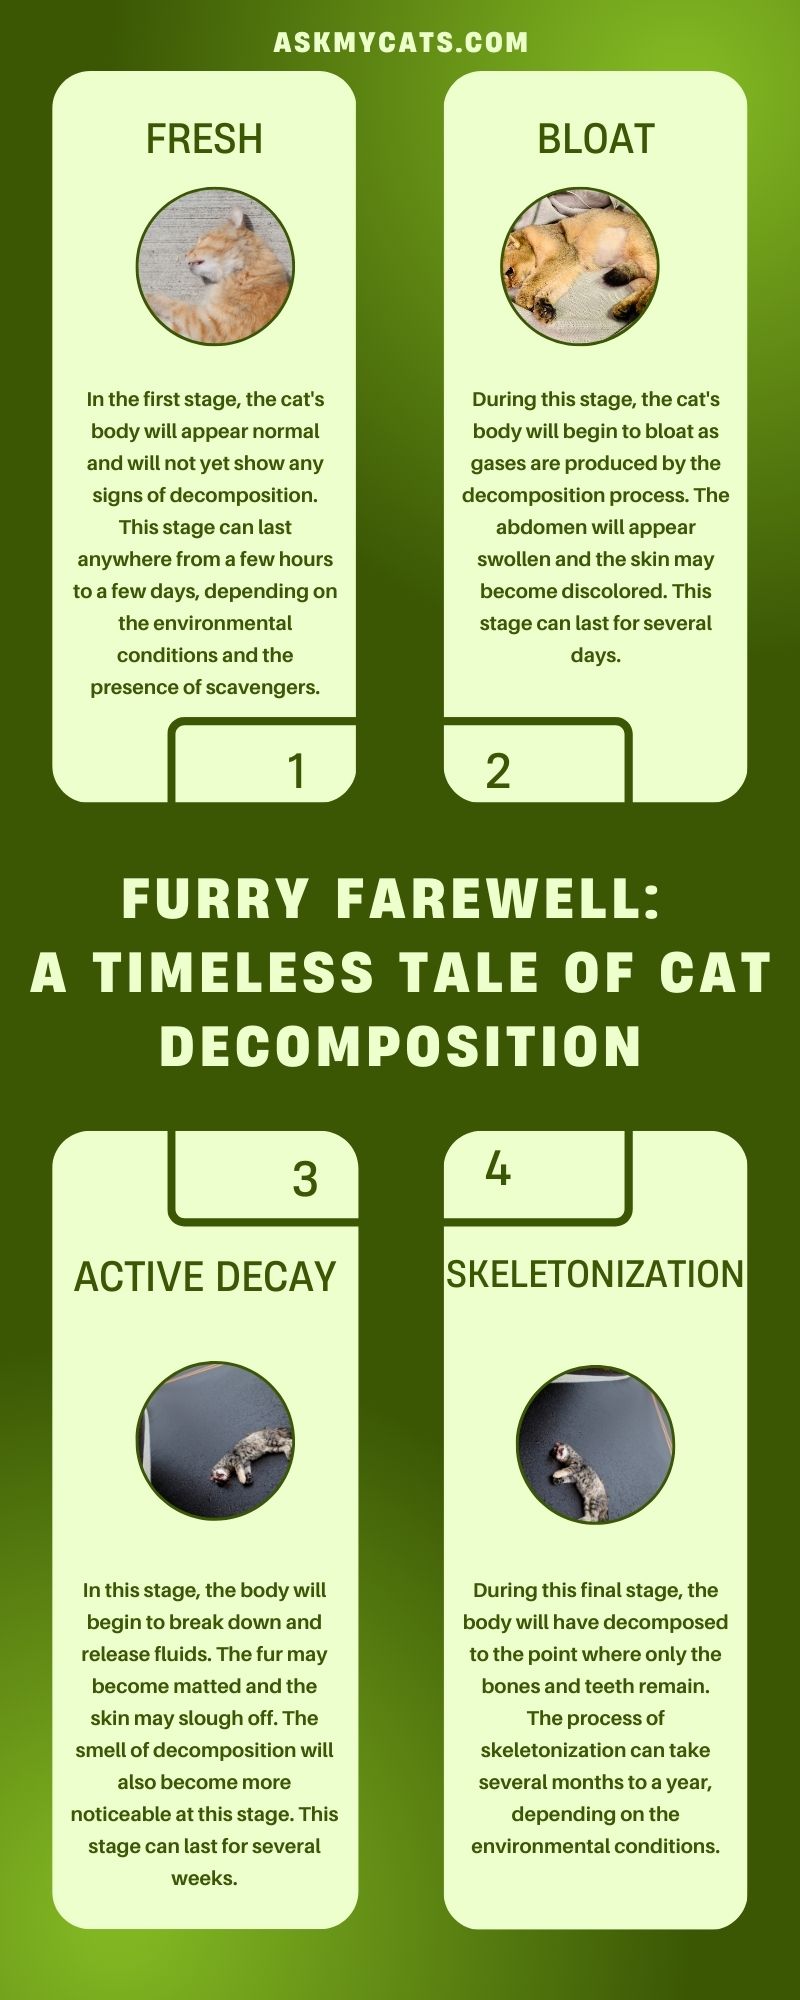 Furry Farewell: A Timeless Tale of Cat Decomposition